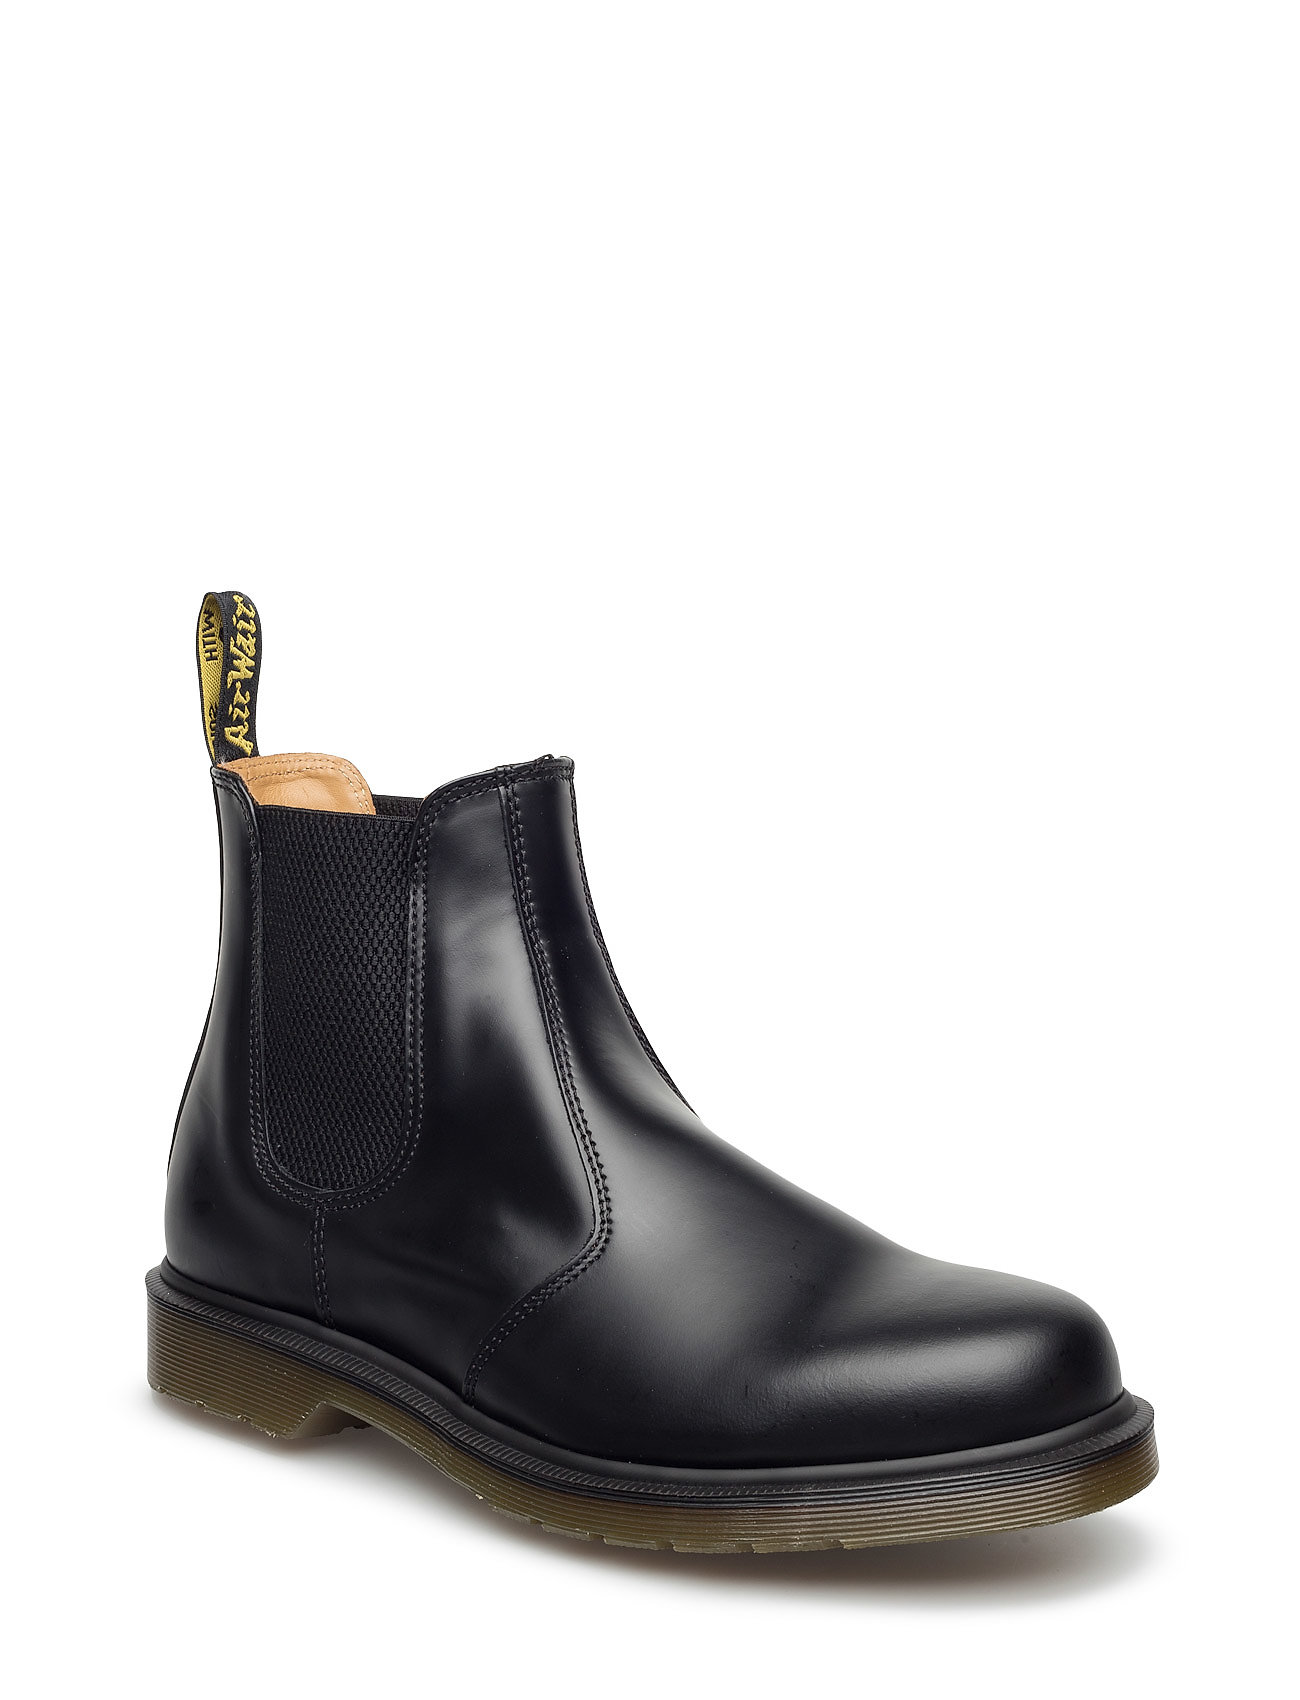 Martens 2976 Black Smooth - Chelsea boots - Boozt.com